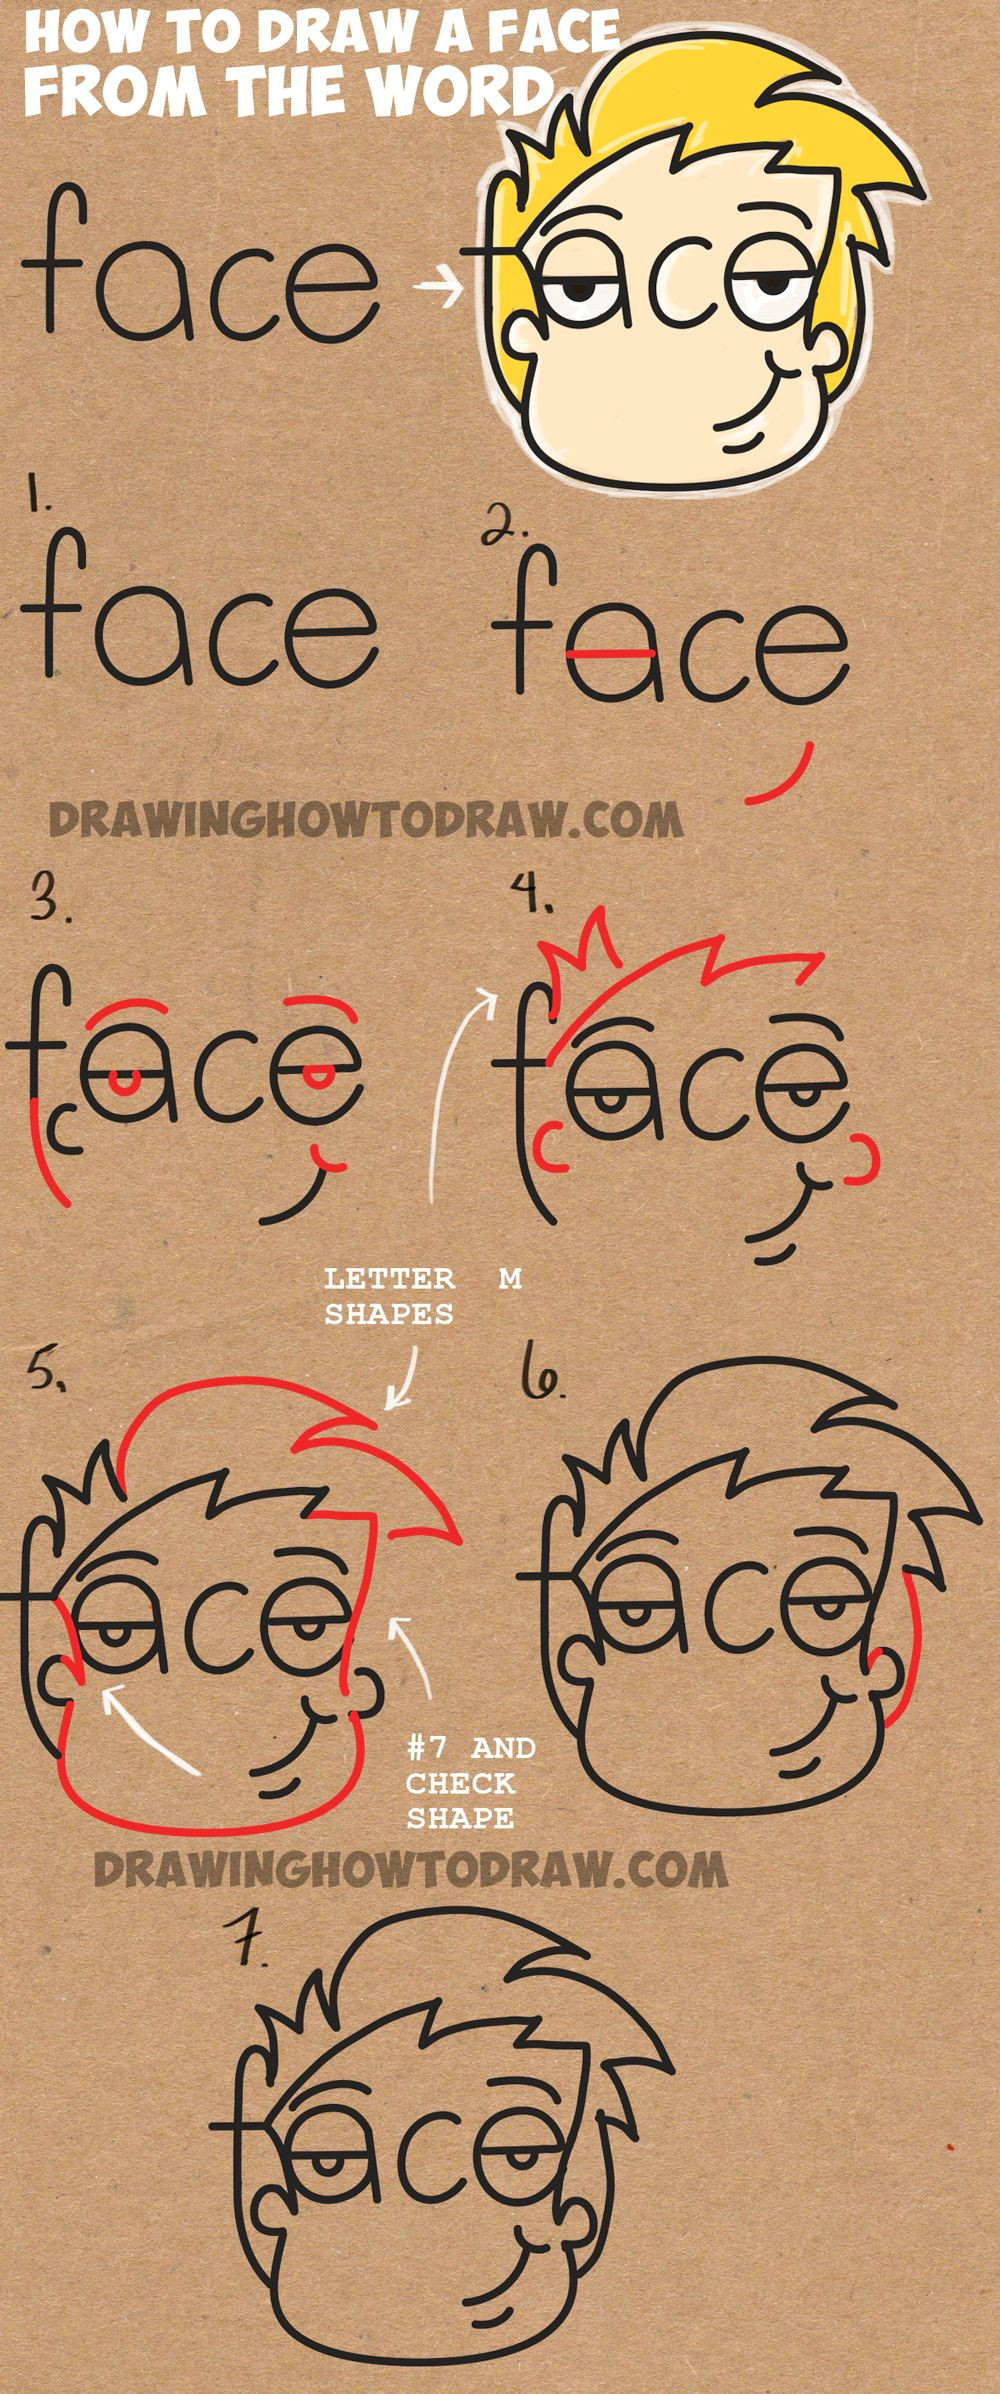 Drawing Cartoons with Letters How to Draw Cartoon Faces From the Word Face Easy Step by Step